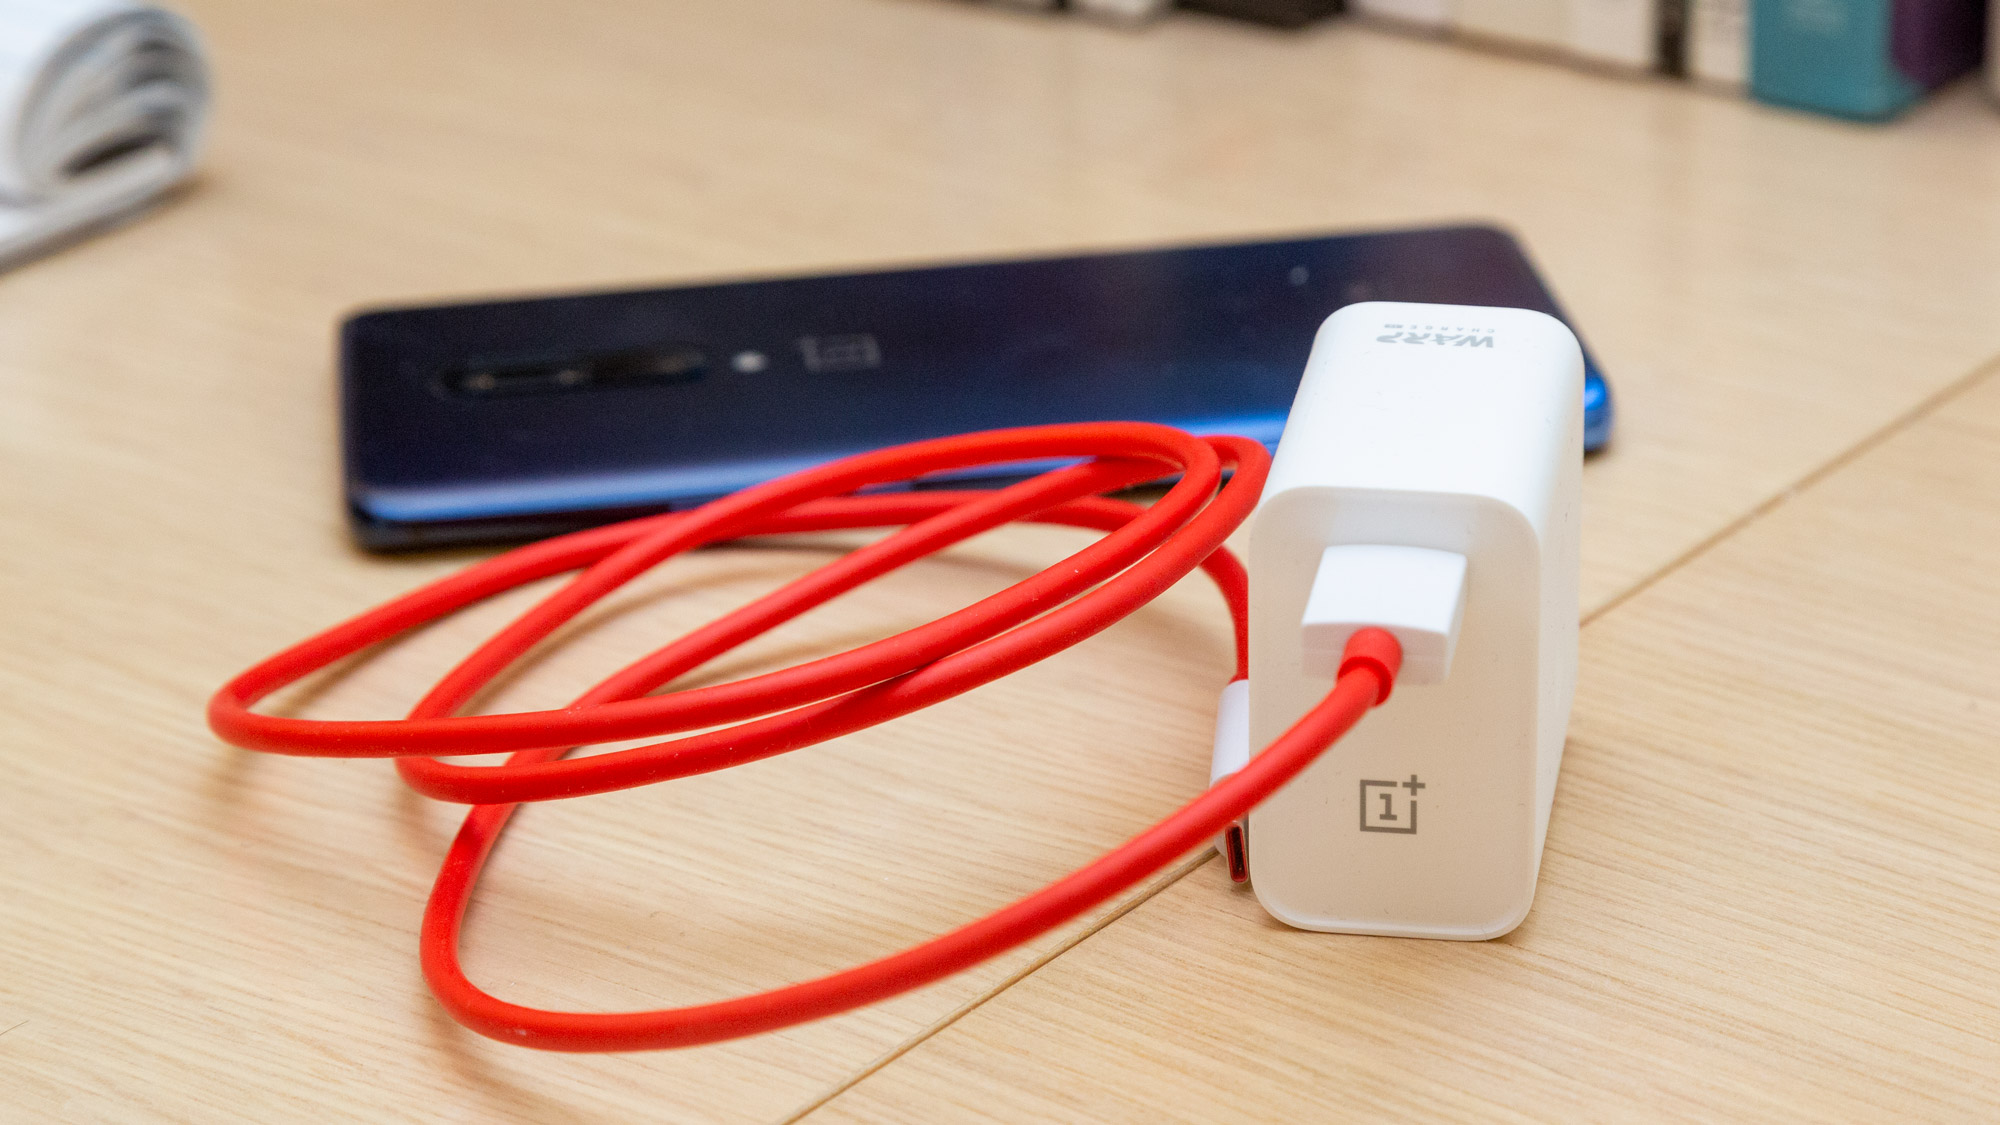 Exclusive: OnePlus 7T have 23% faster charging with Warp Charge 30T | TechRadar